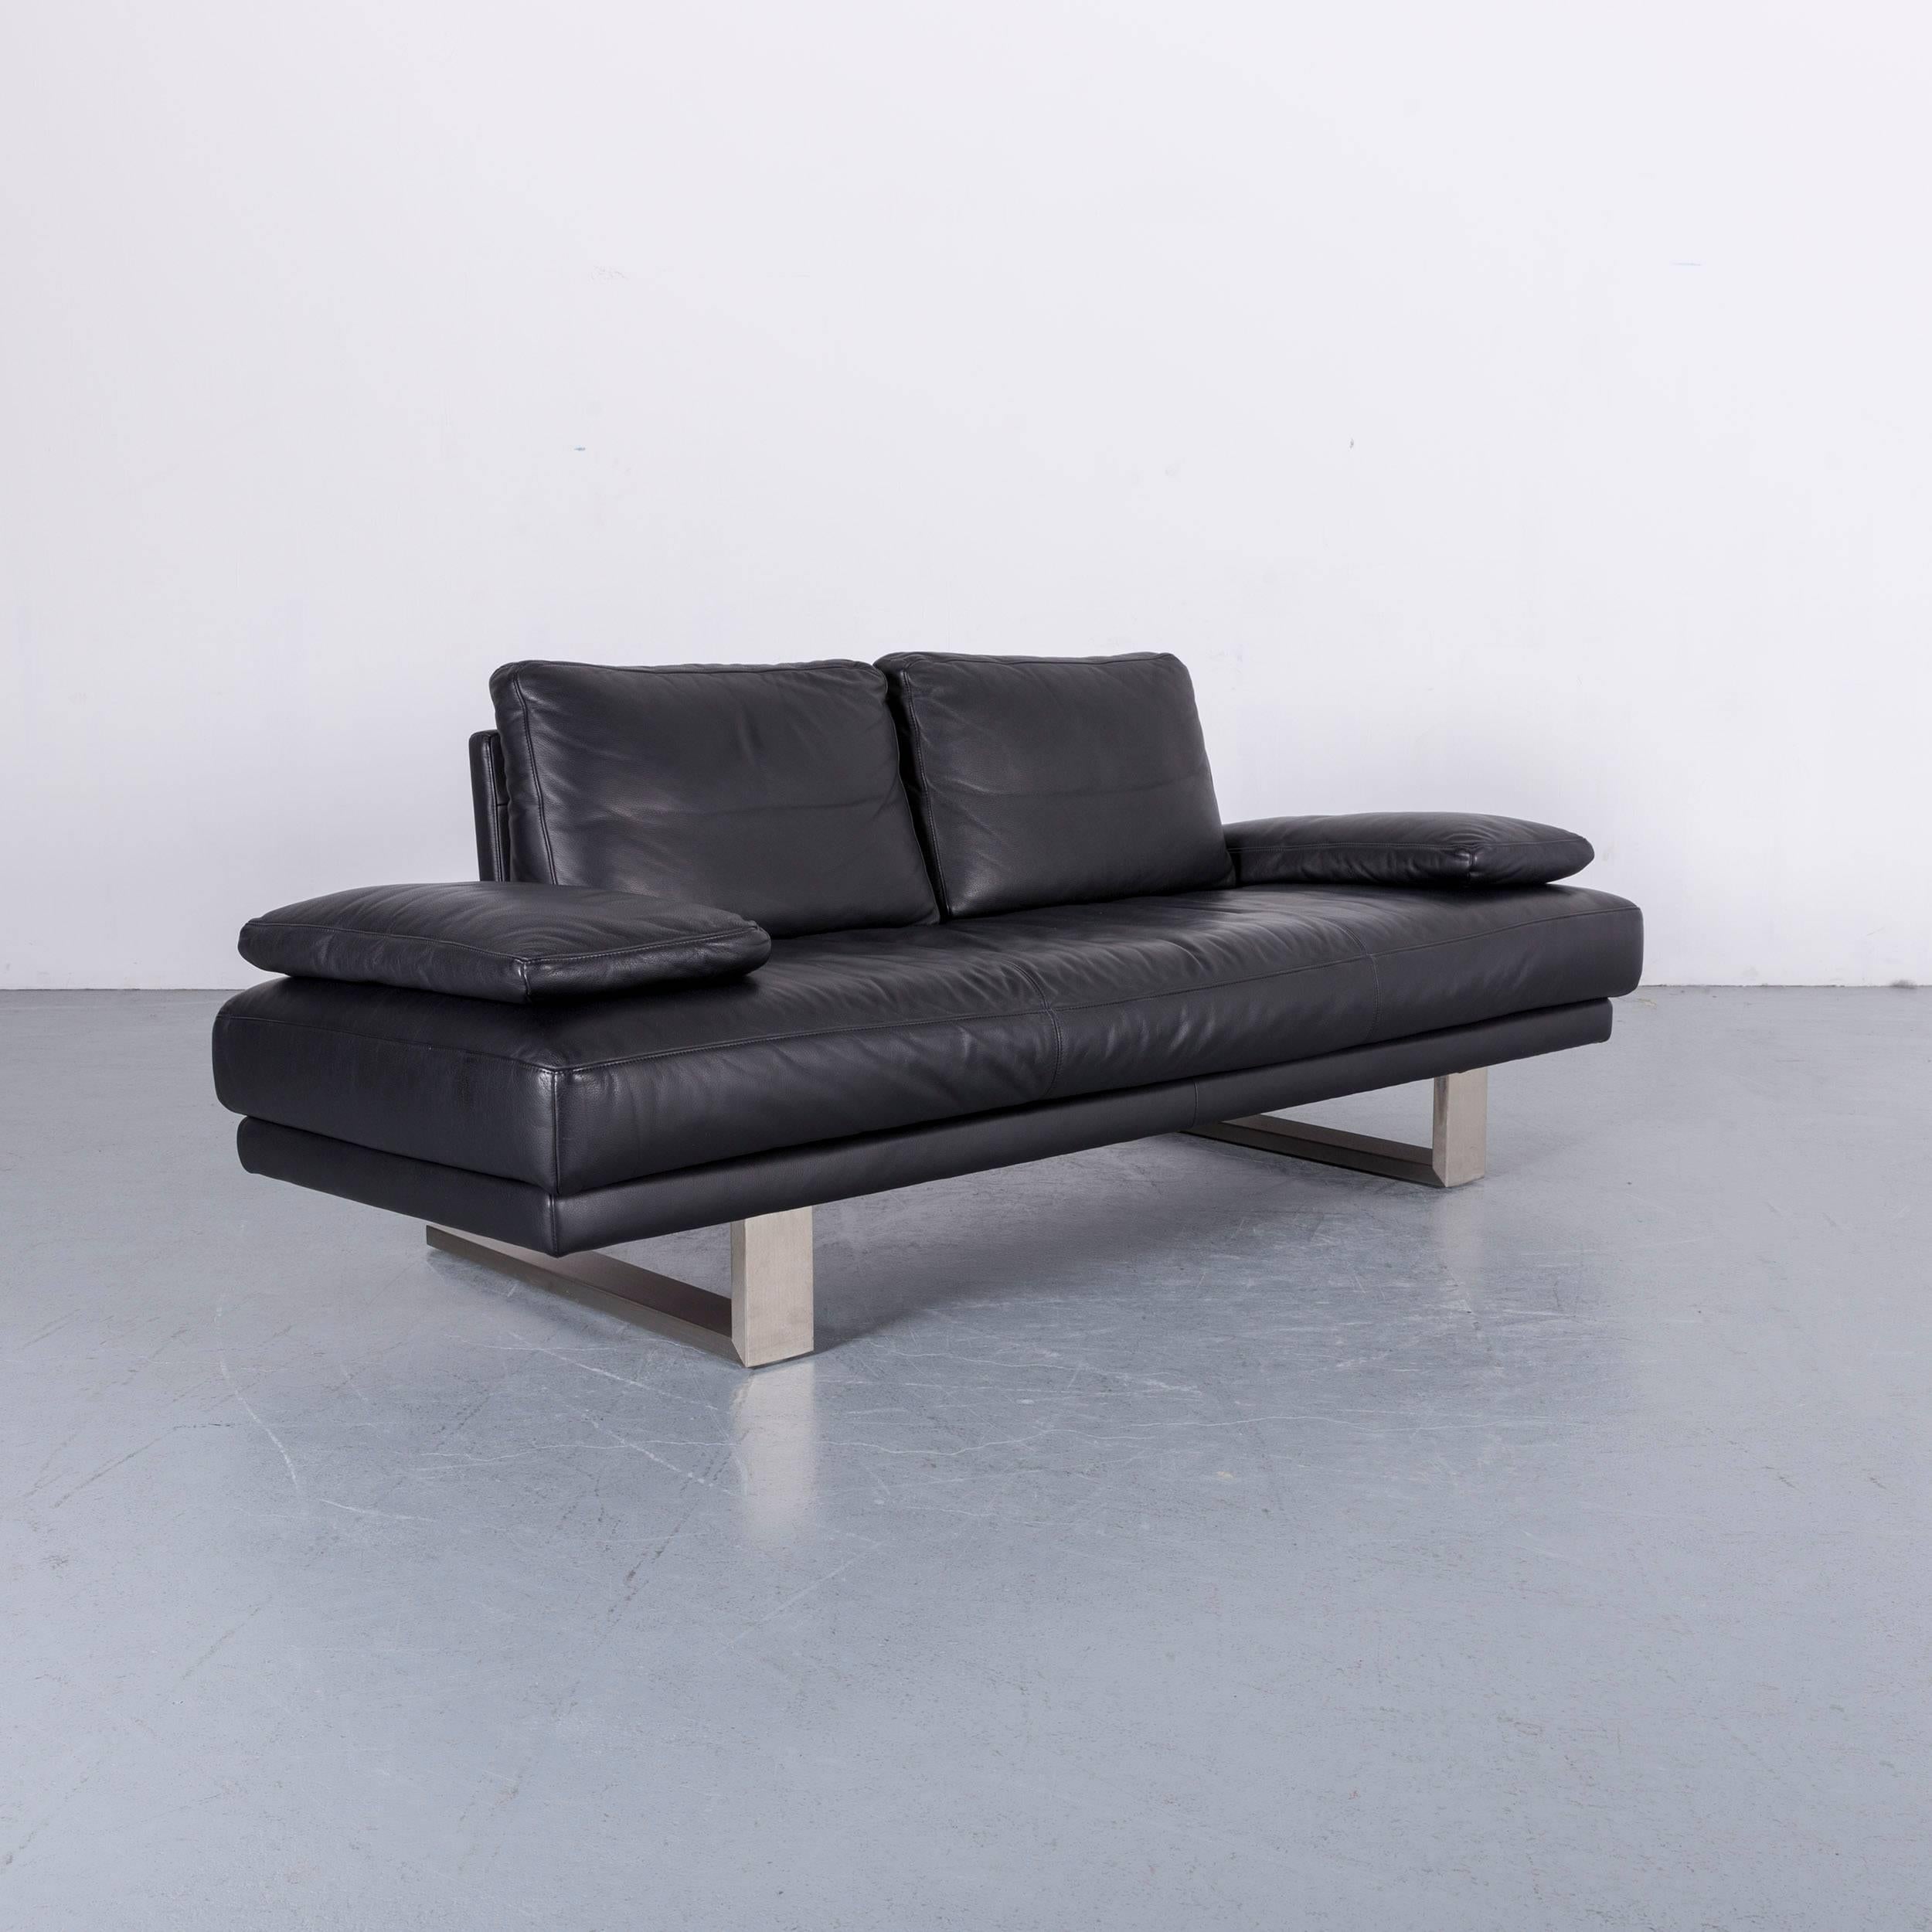 Contemporary Rolf Benz 6600 Designer Leather Sofa in Black Two-Seat